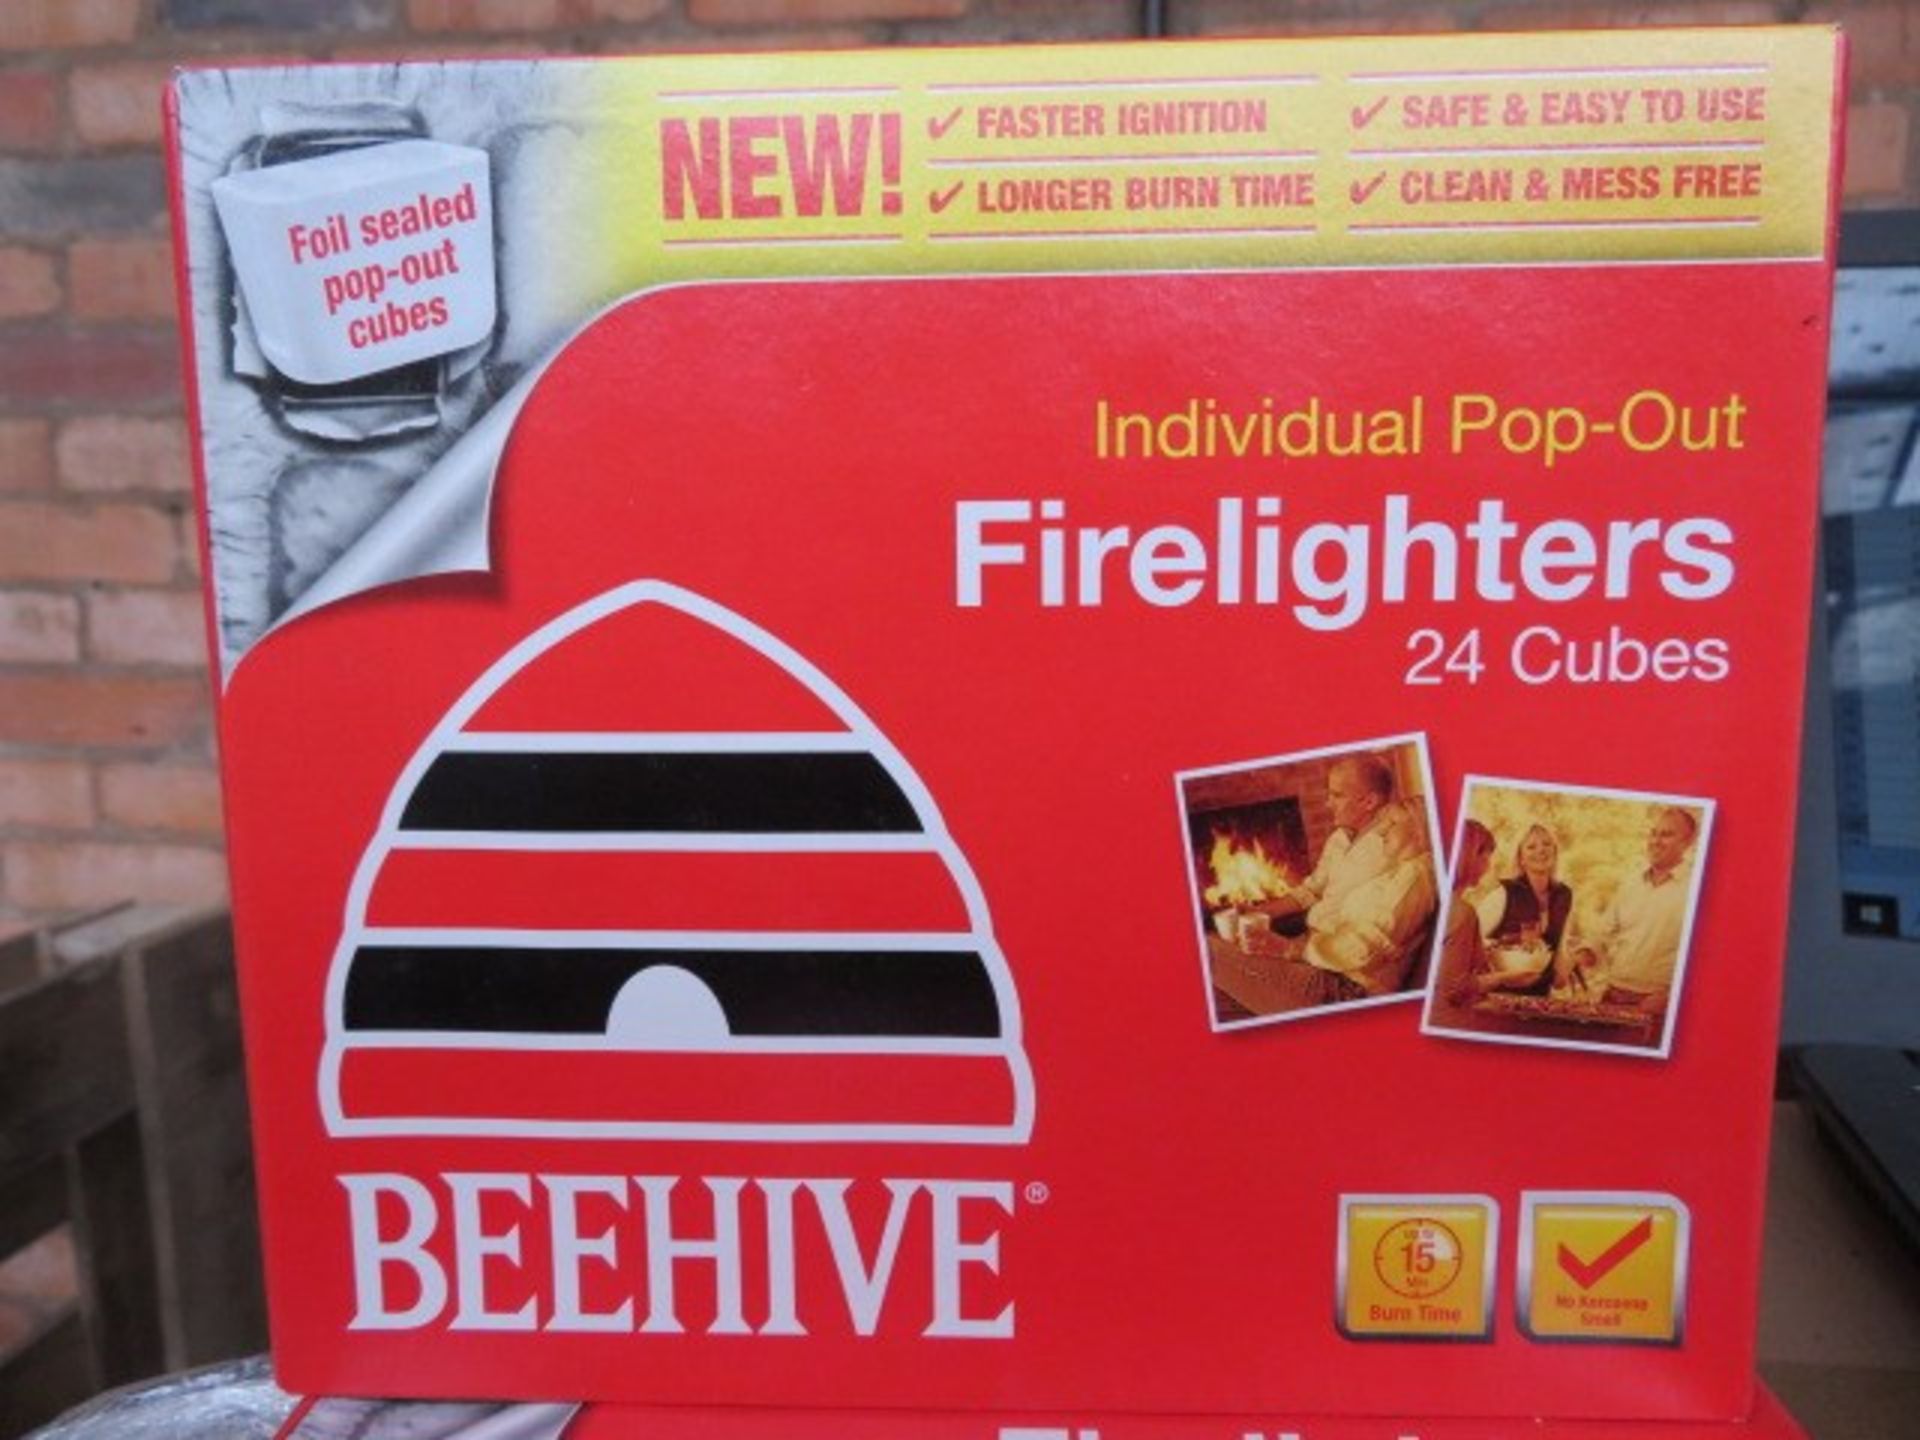 Pallet to contain 400 x packs of 24 beehive fire lighters individual pop-out (15 minutes burn time).